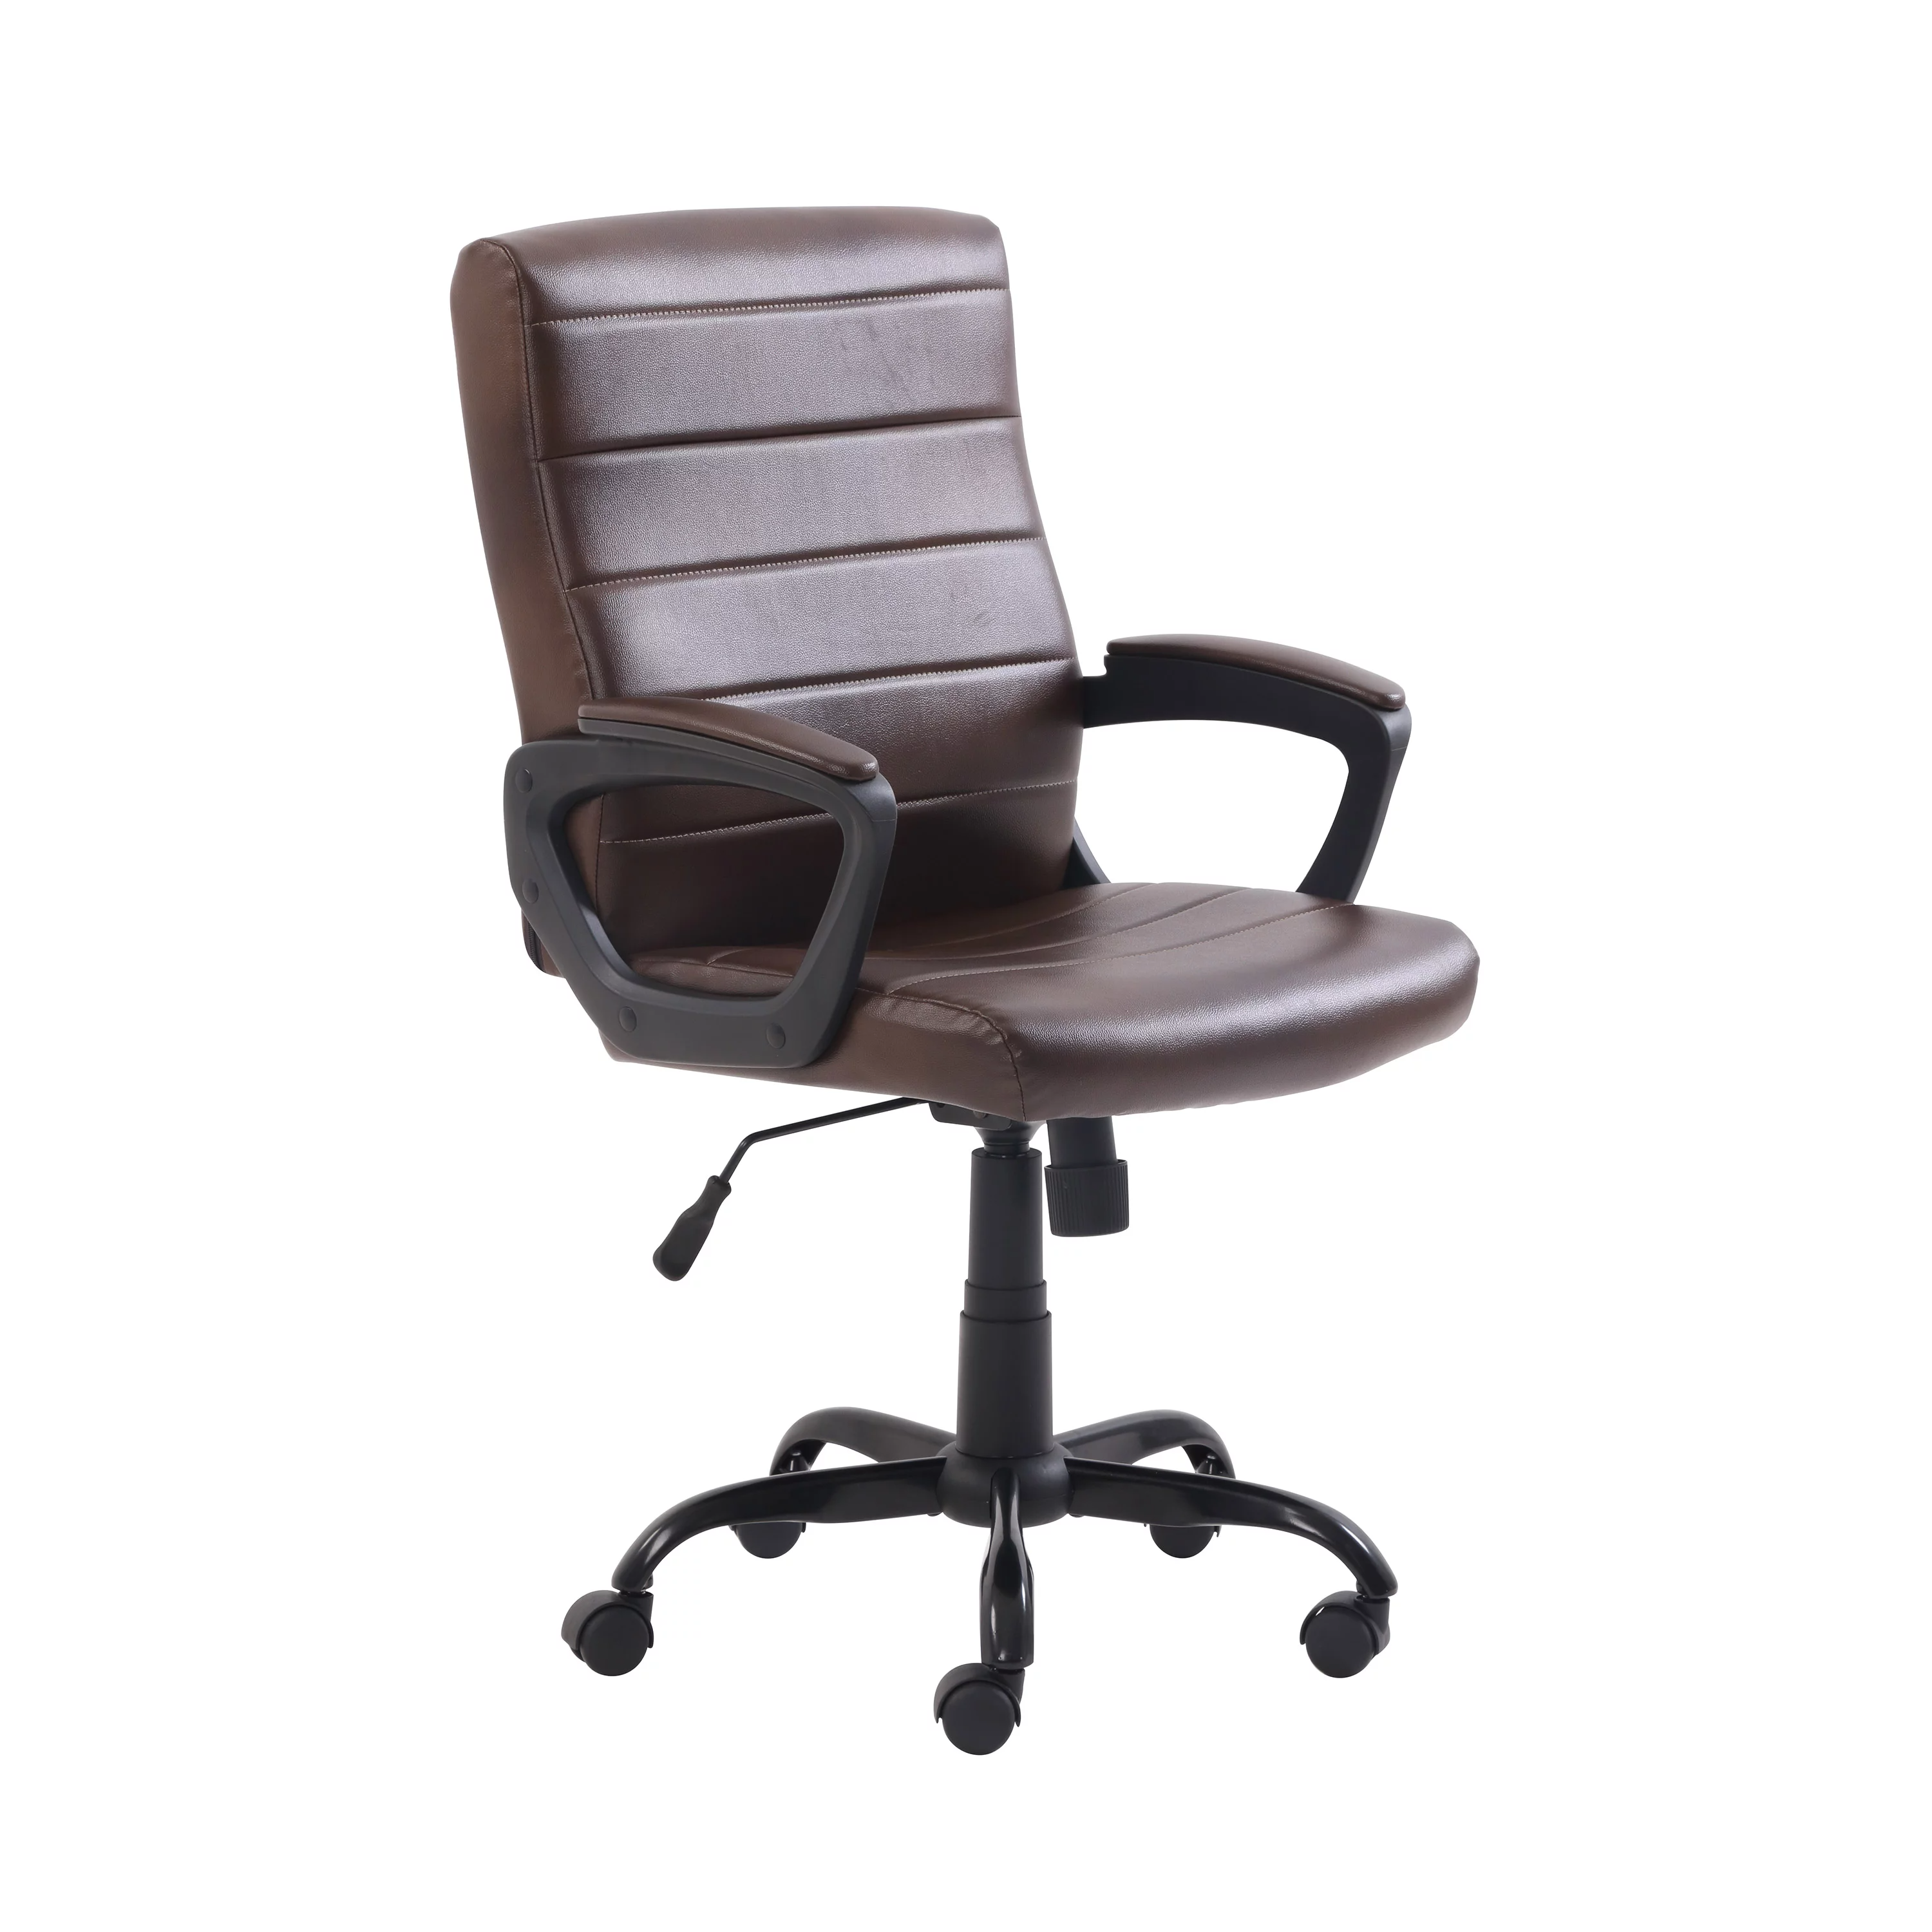 10 top-rated office chairs for working from home under $100 - Reviewed